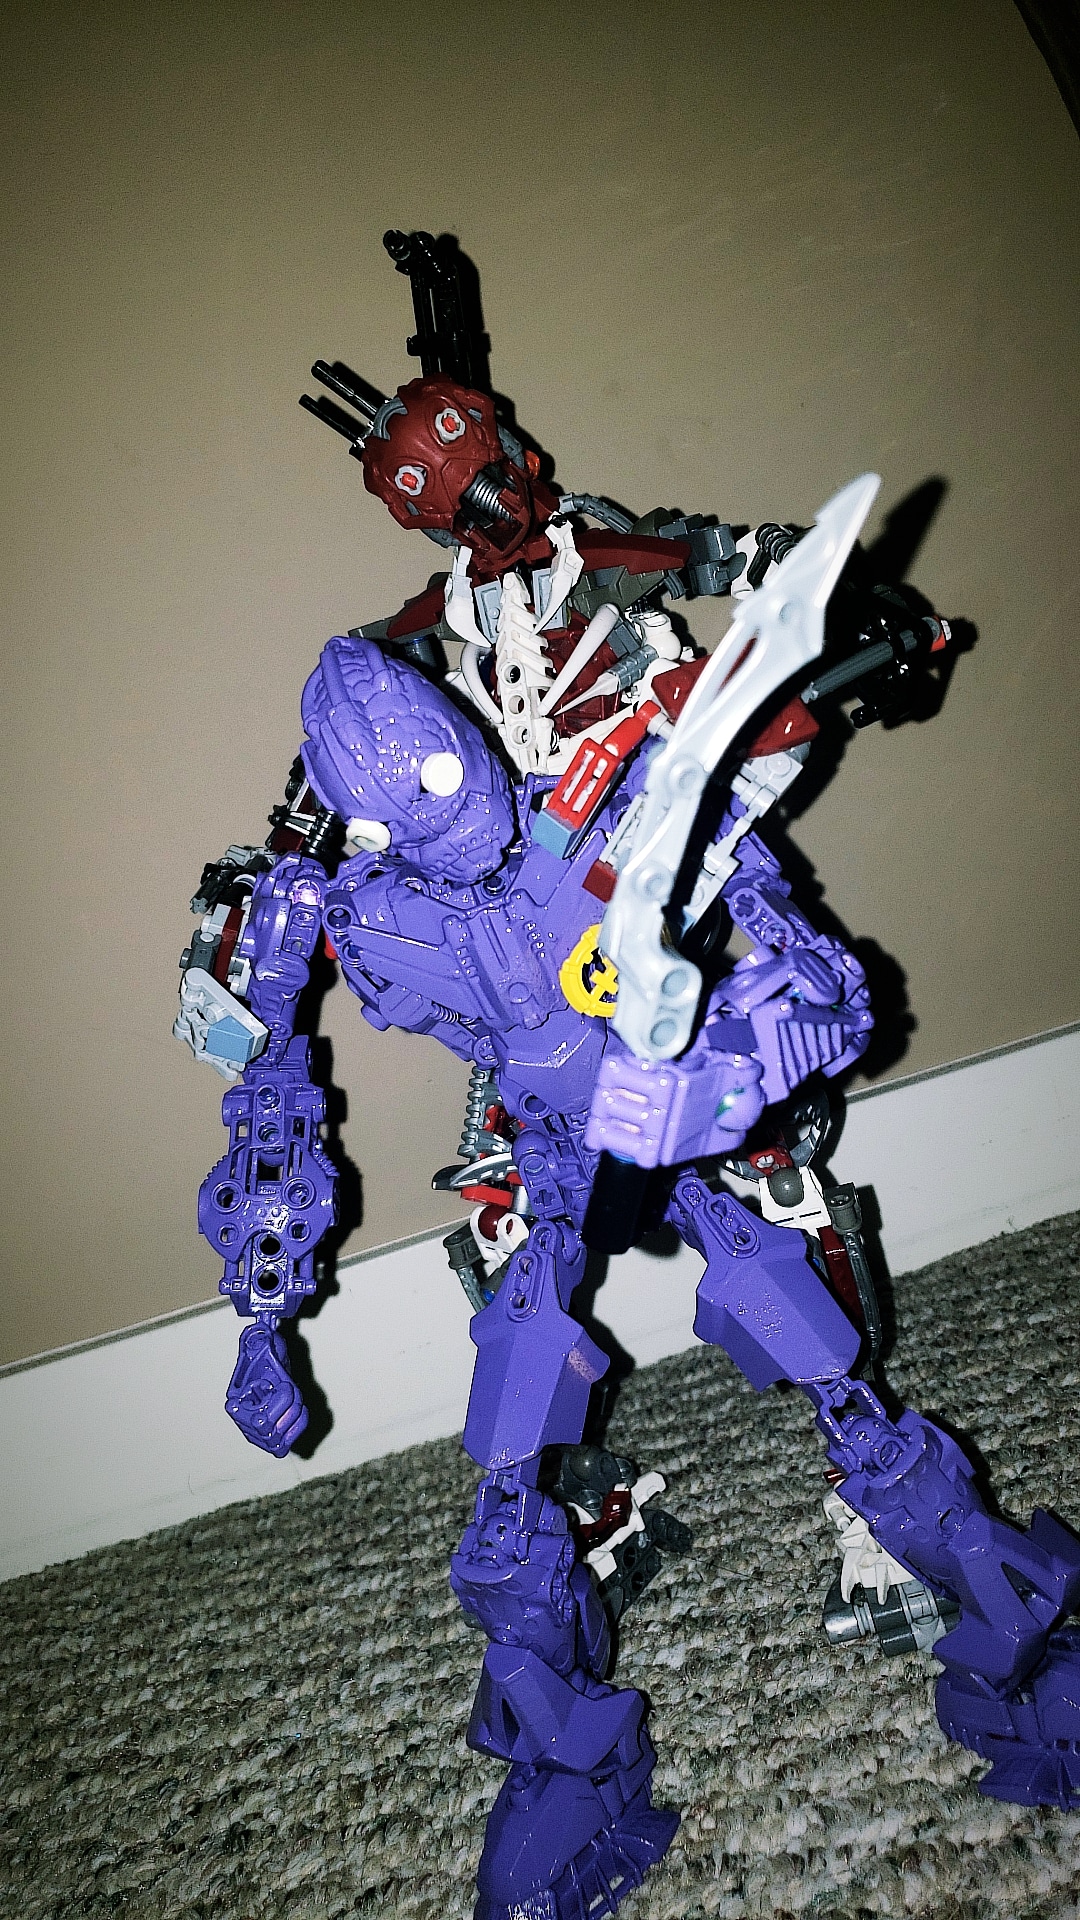 Purple guy MoC - Lego Creations - The TTV Message Boards